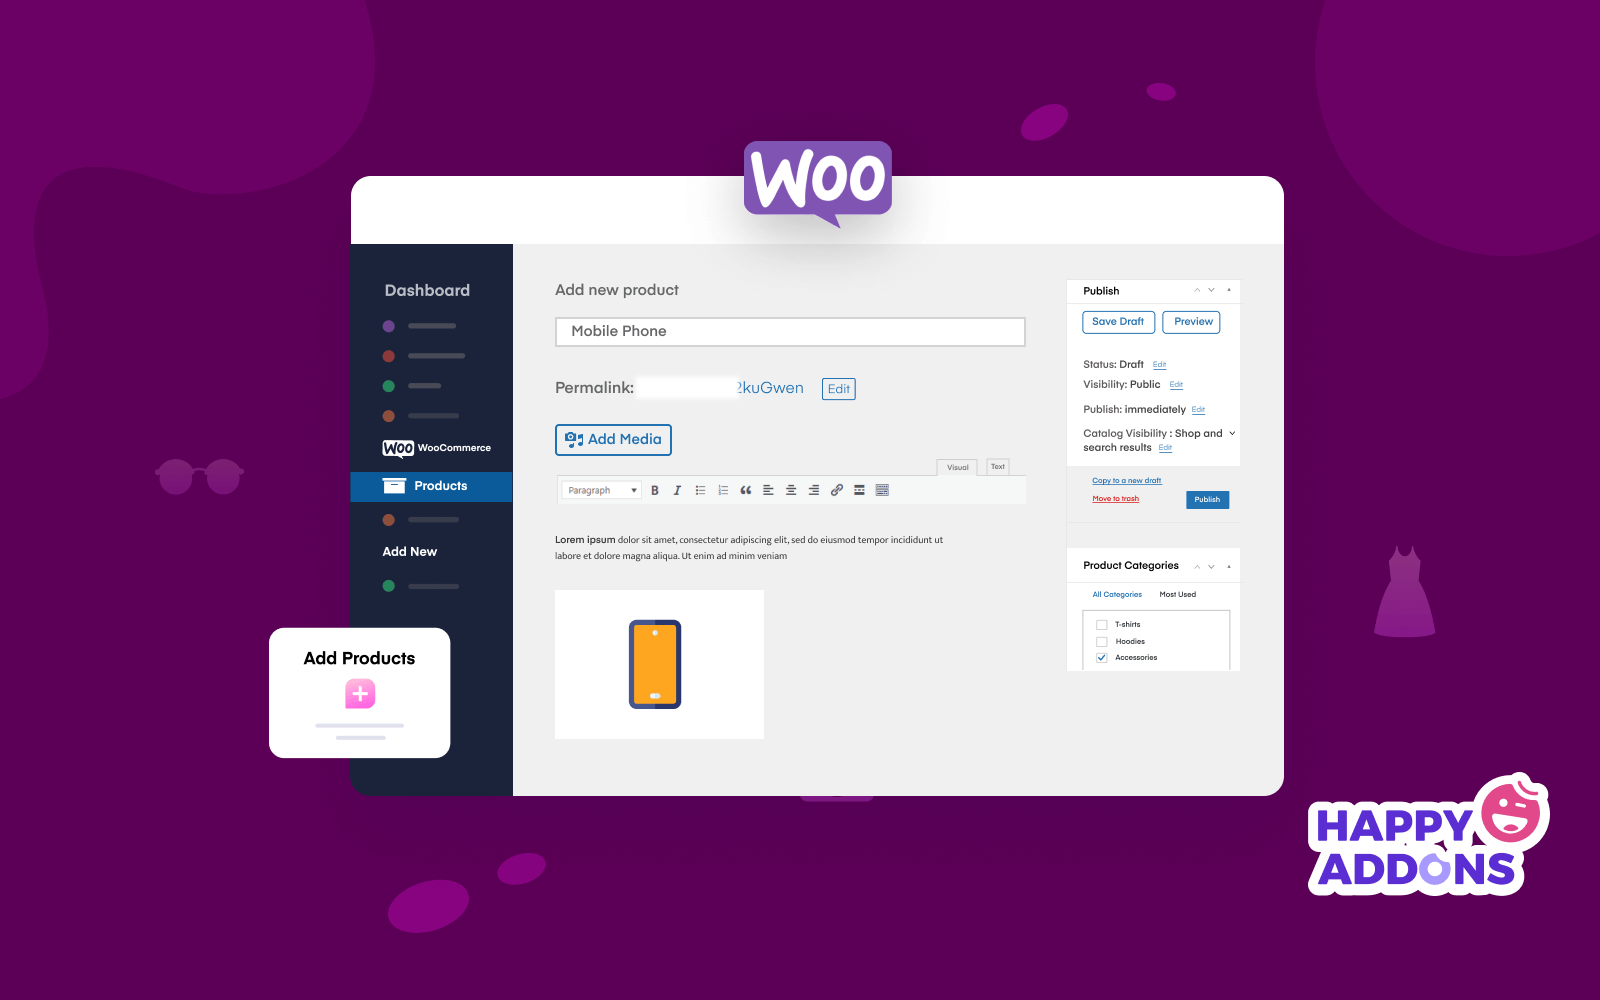 How to add products in WooCommerce